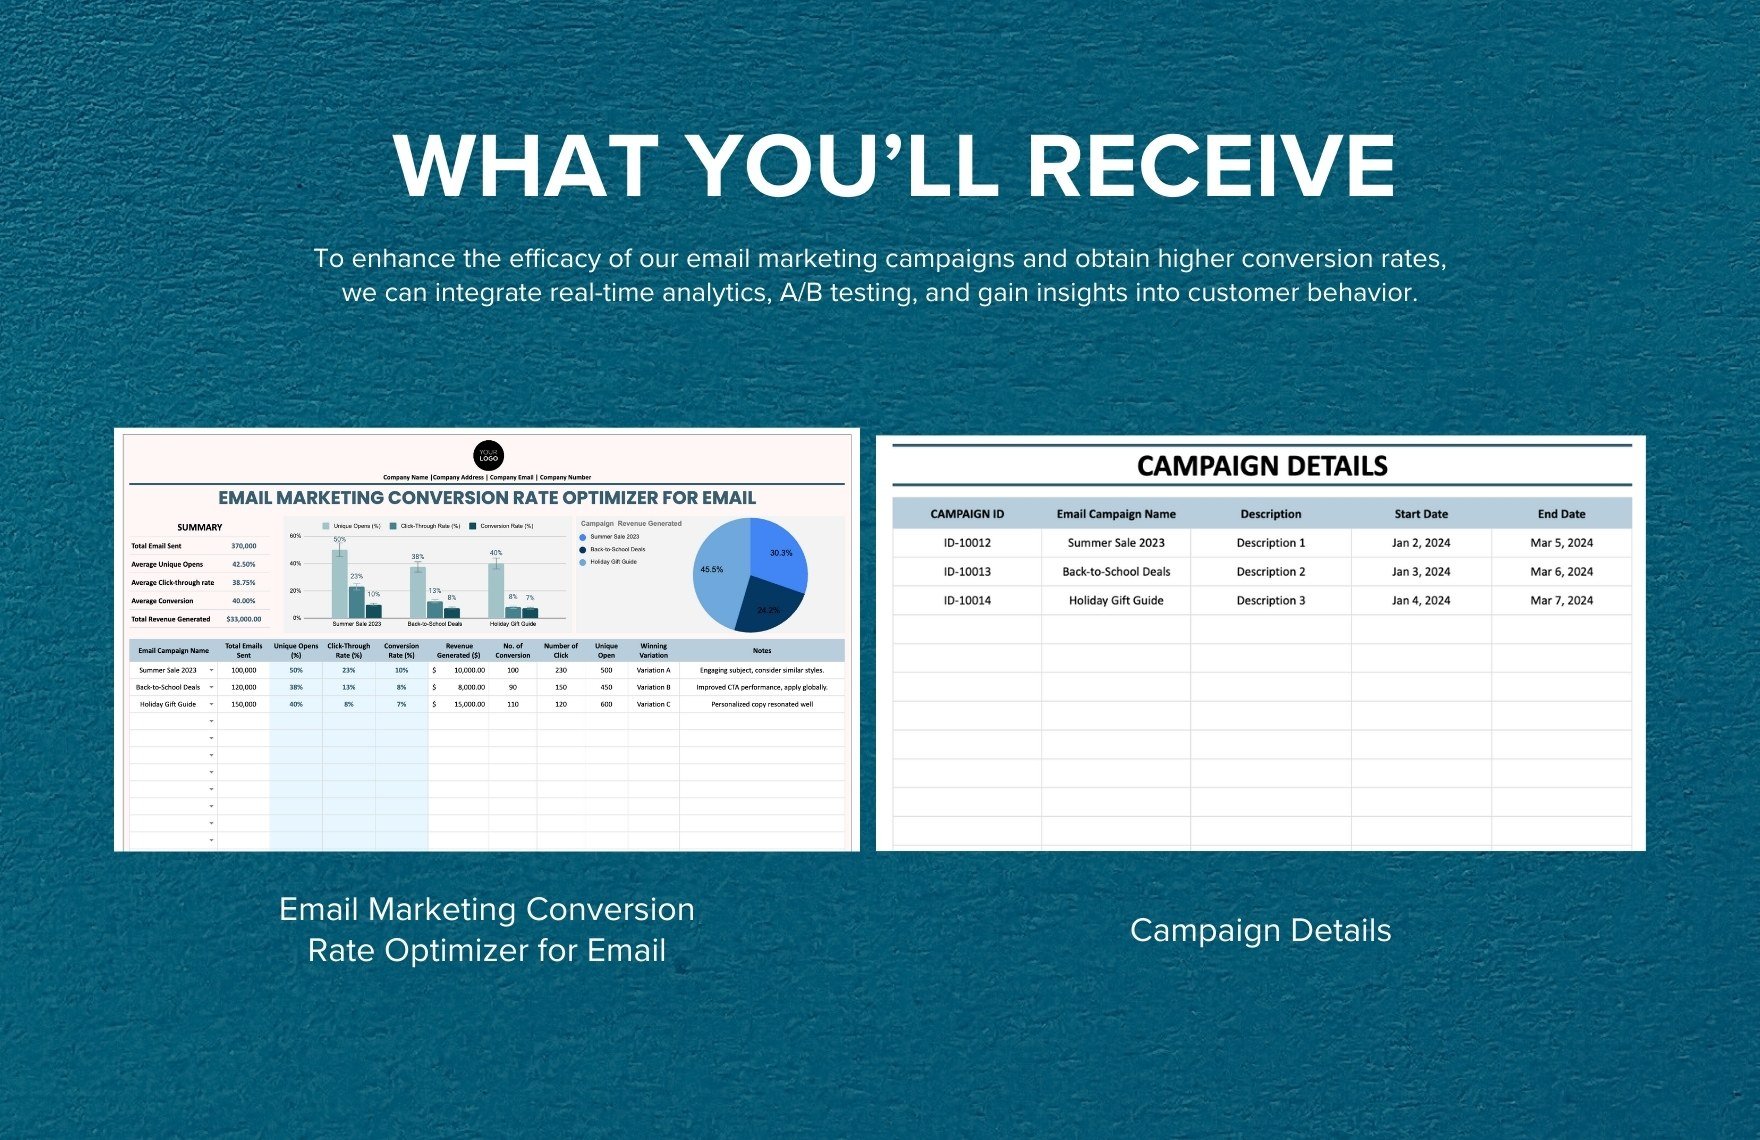 Email Marketing Conversion Rate Optimizer for Email Template